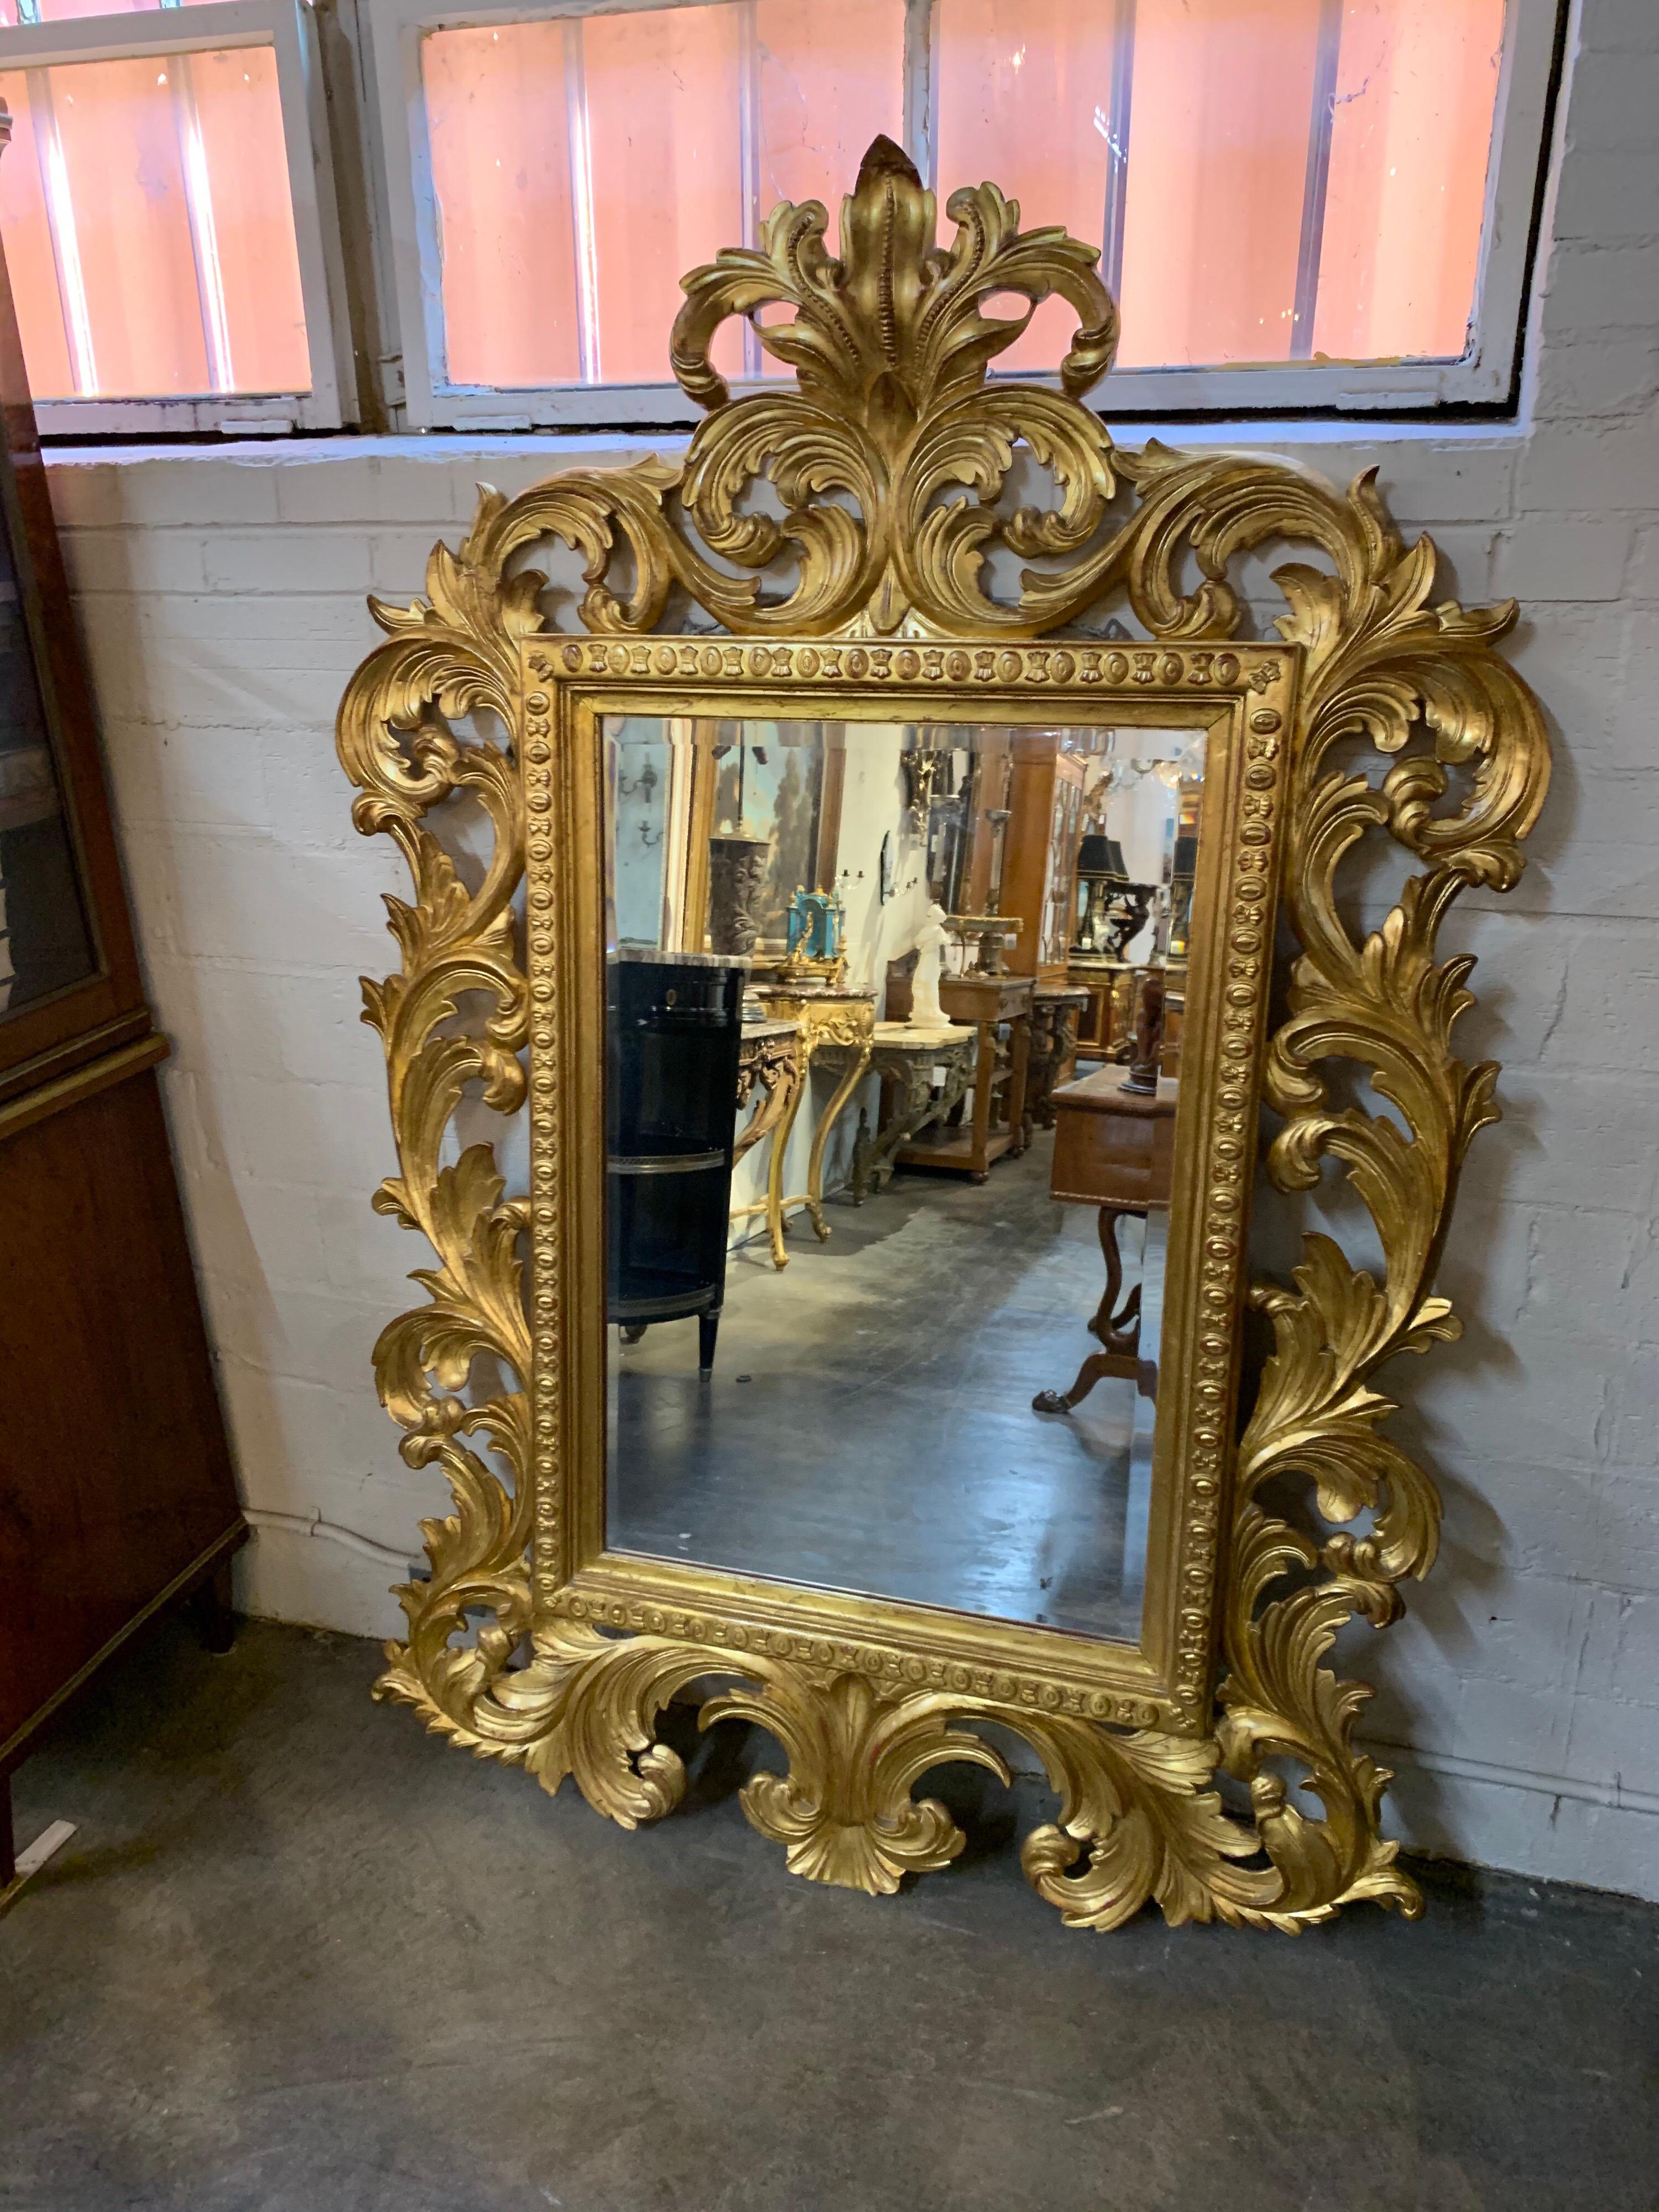 Very elegant large scale Italian Baroque style carved and gold gilt mirror. Great scrolling pattern creates a dramatic and impressive effect.